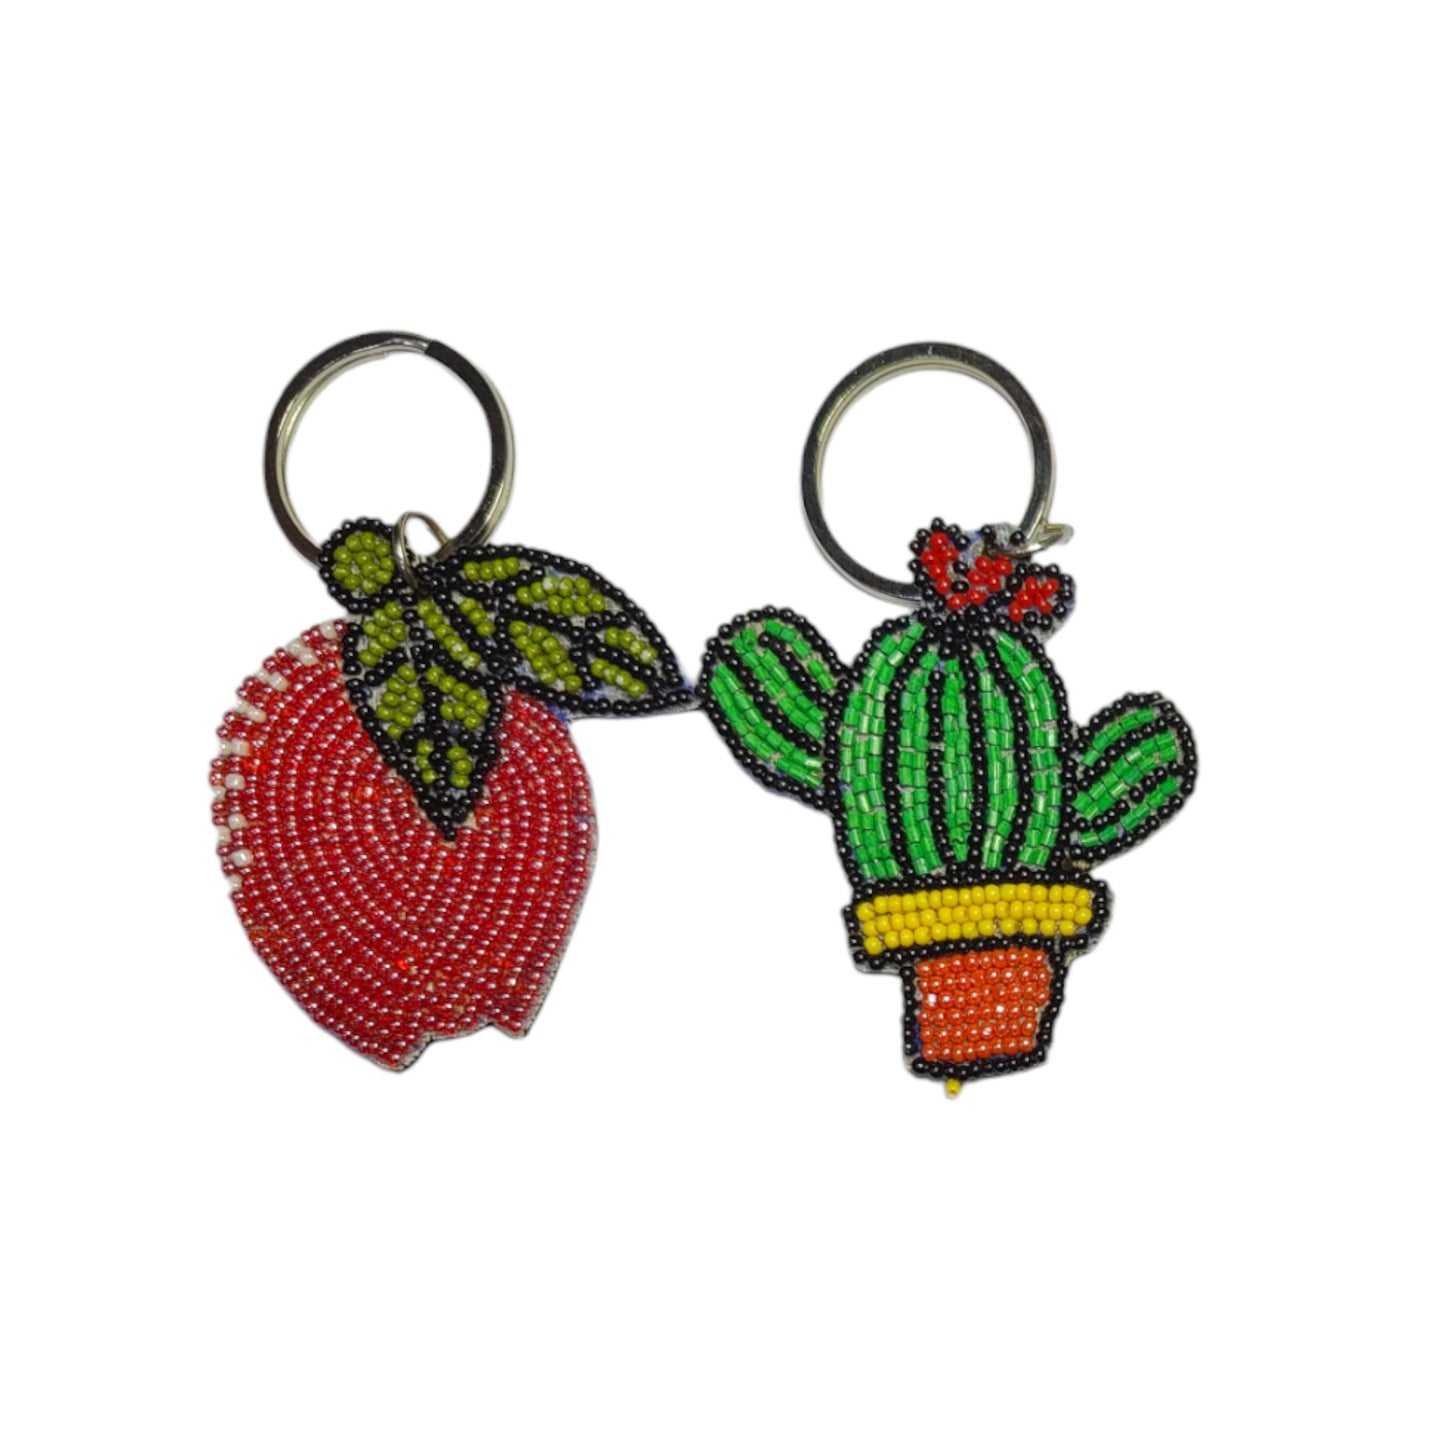 These keychains are perfect accessory to elevate the look of your bag. 